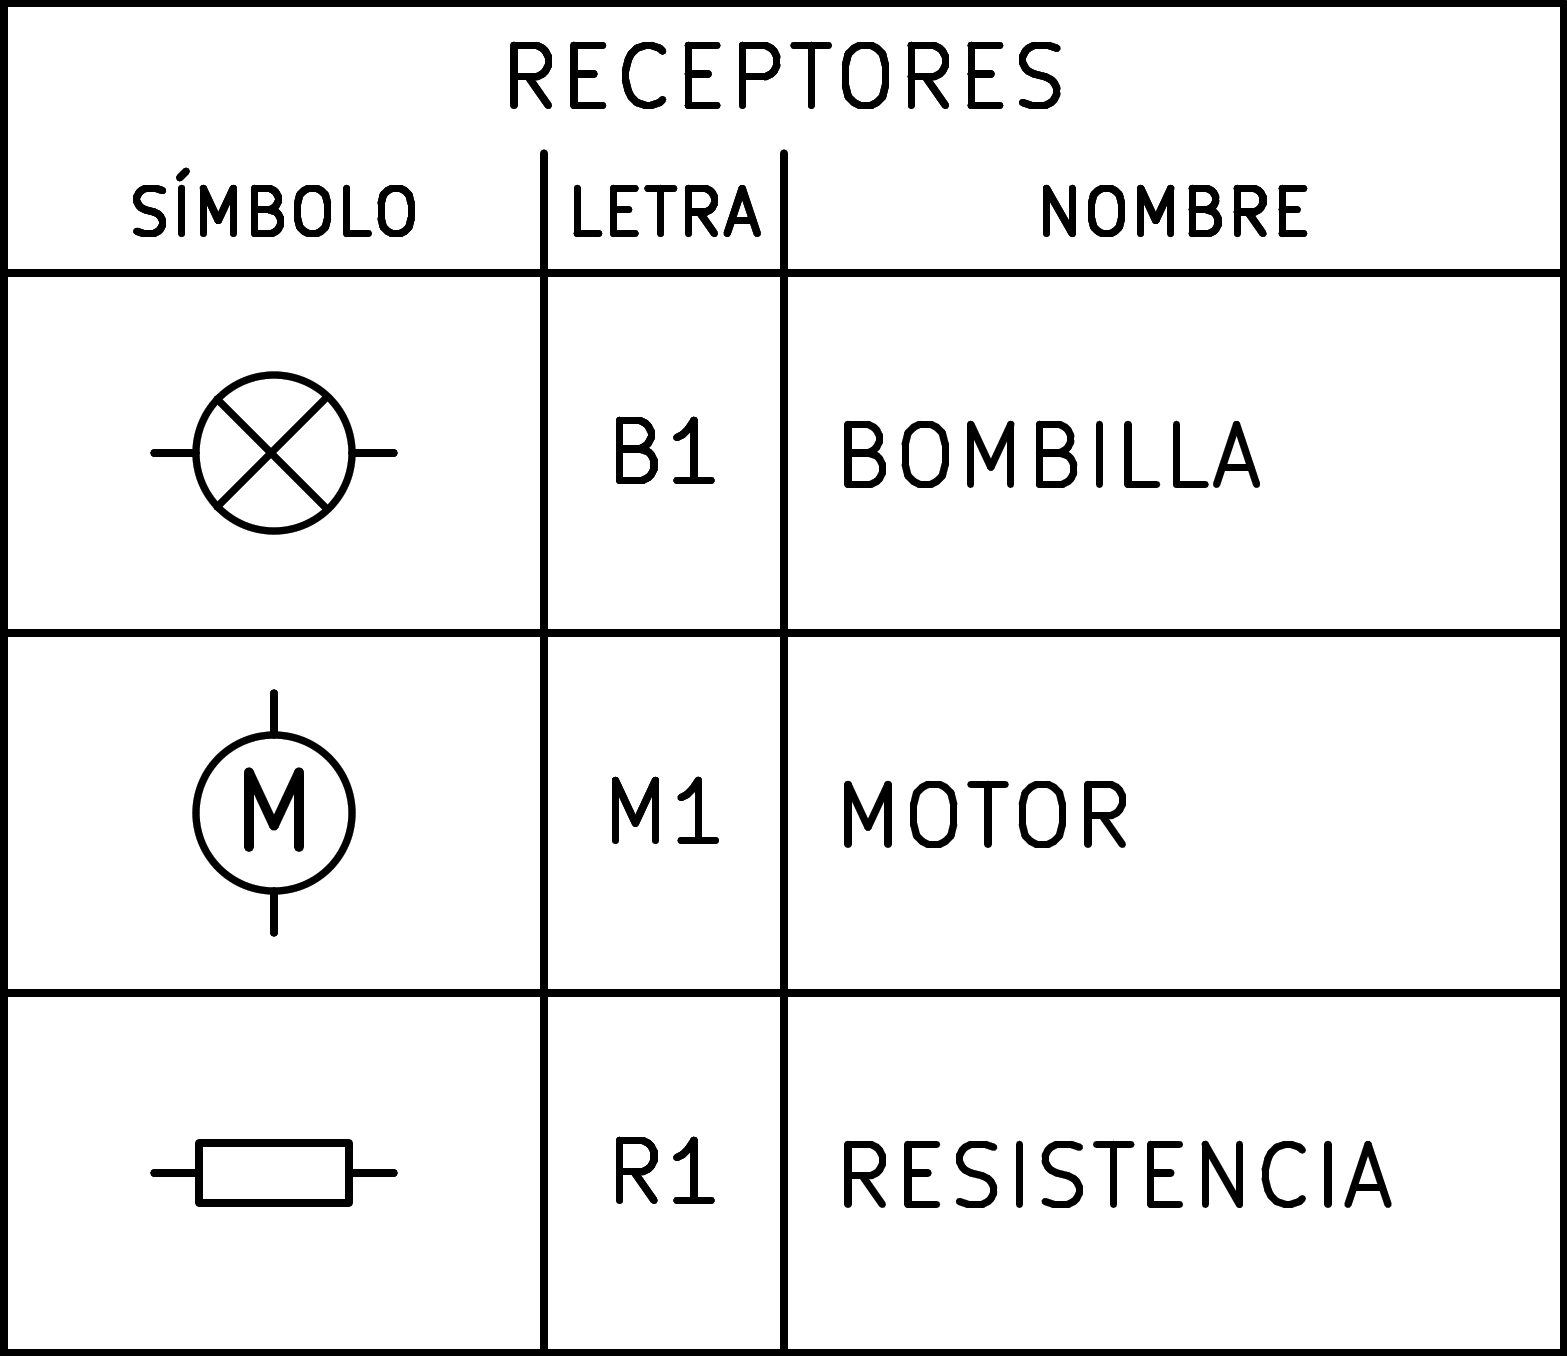 _images/electric-simbolos-receptores.png